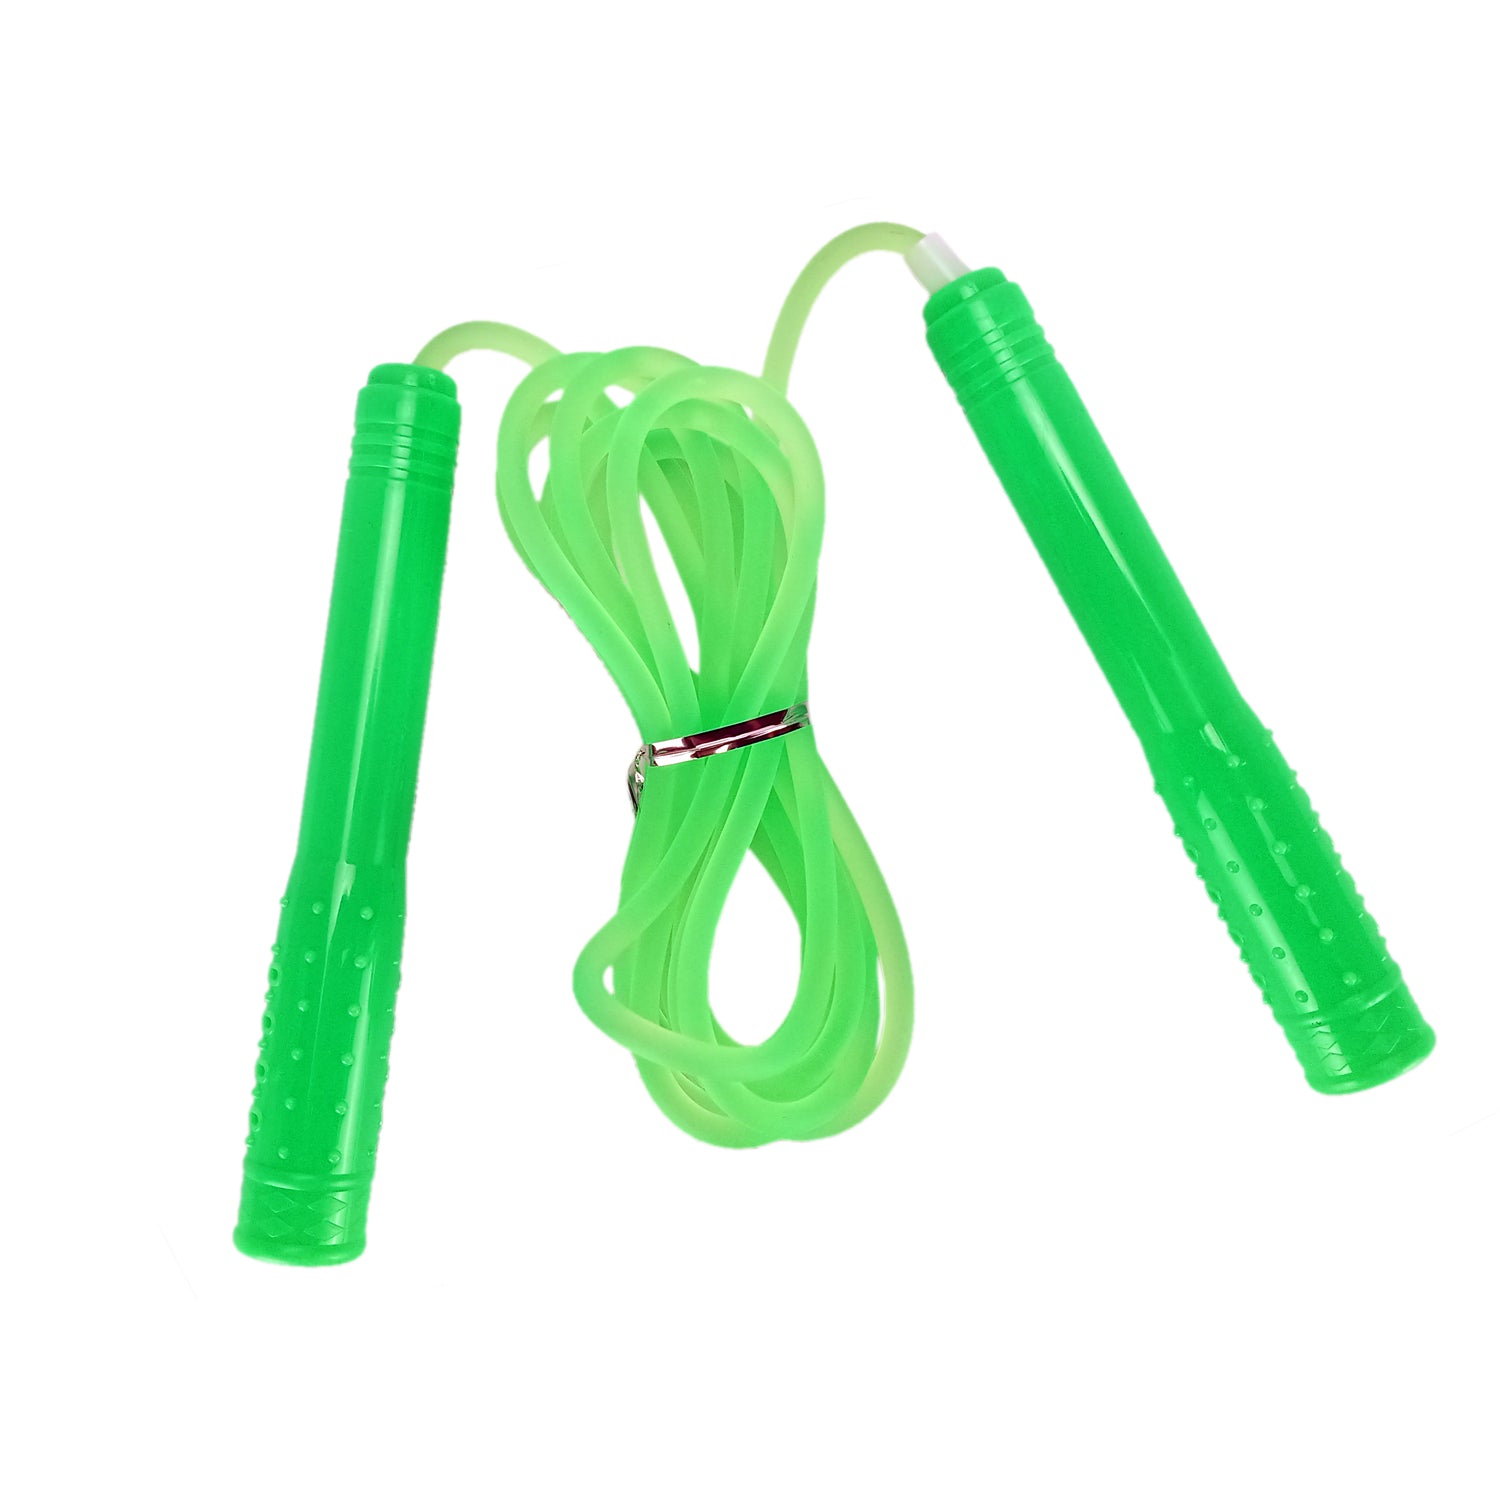 Vector X VX-Player Jump Rope With Fragrance (color may very) - Best Price online Prokicksports.com